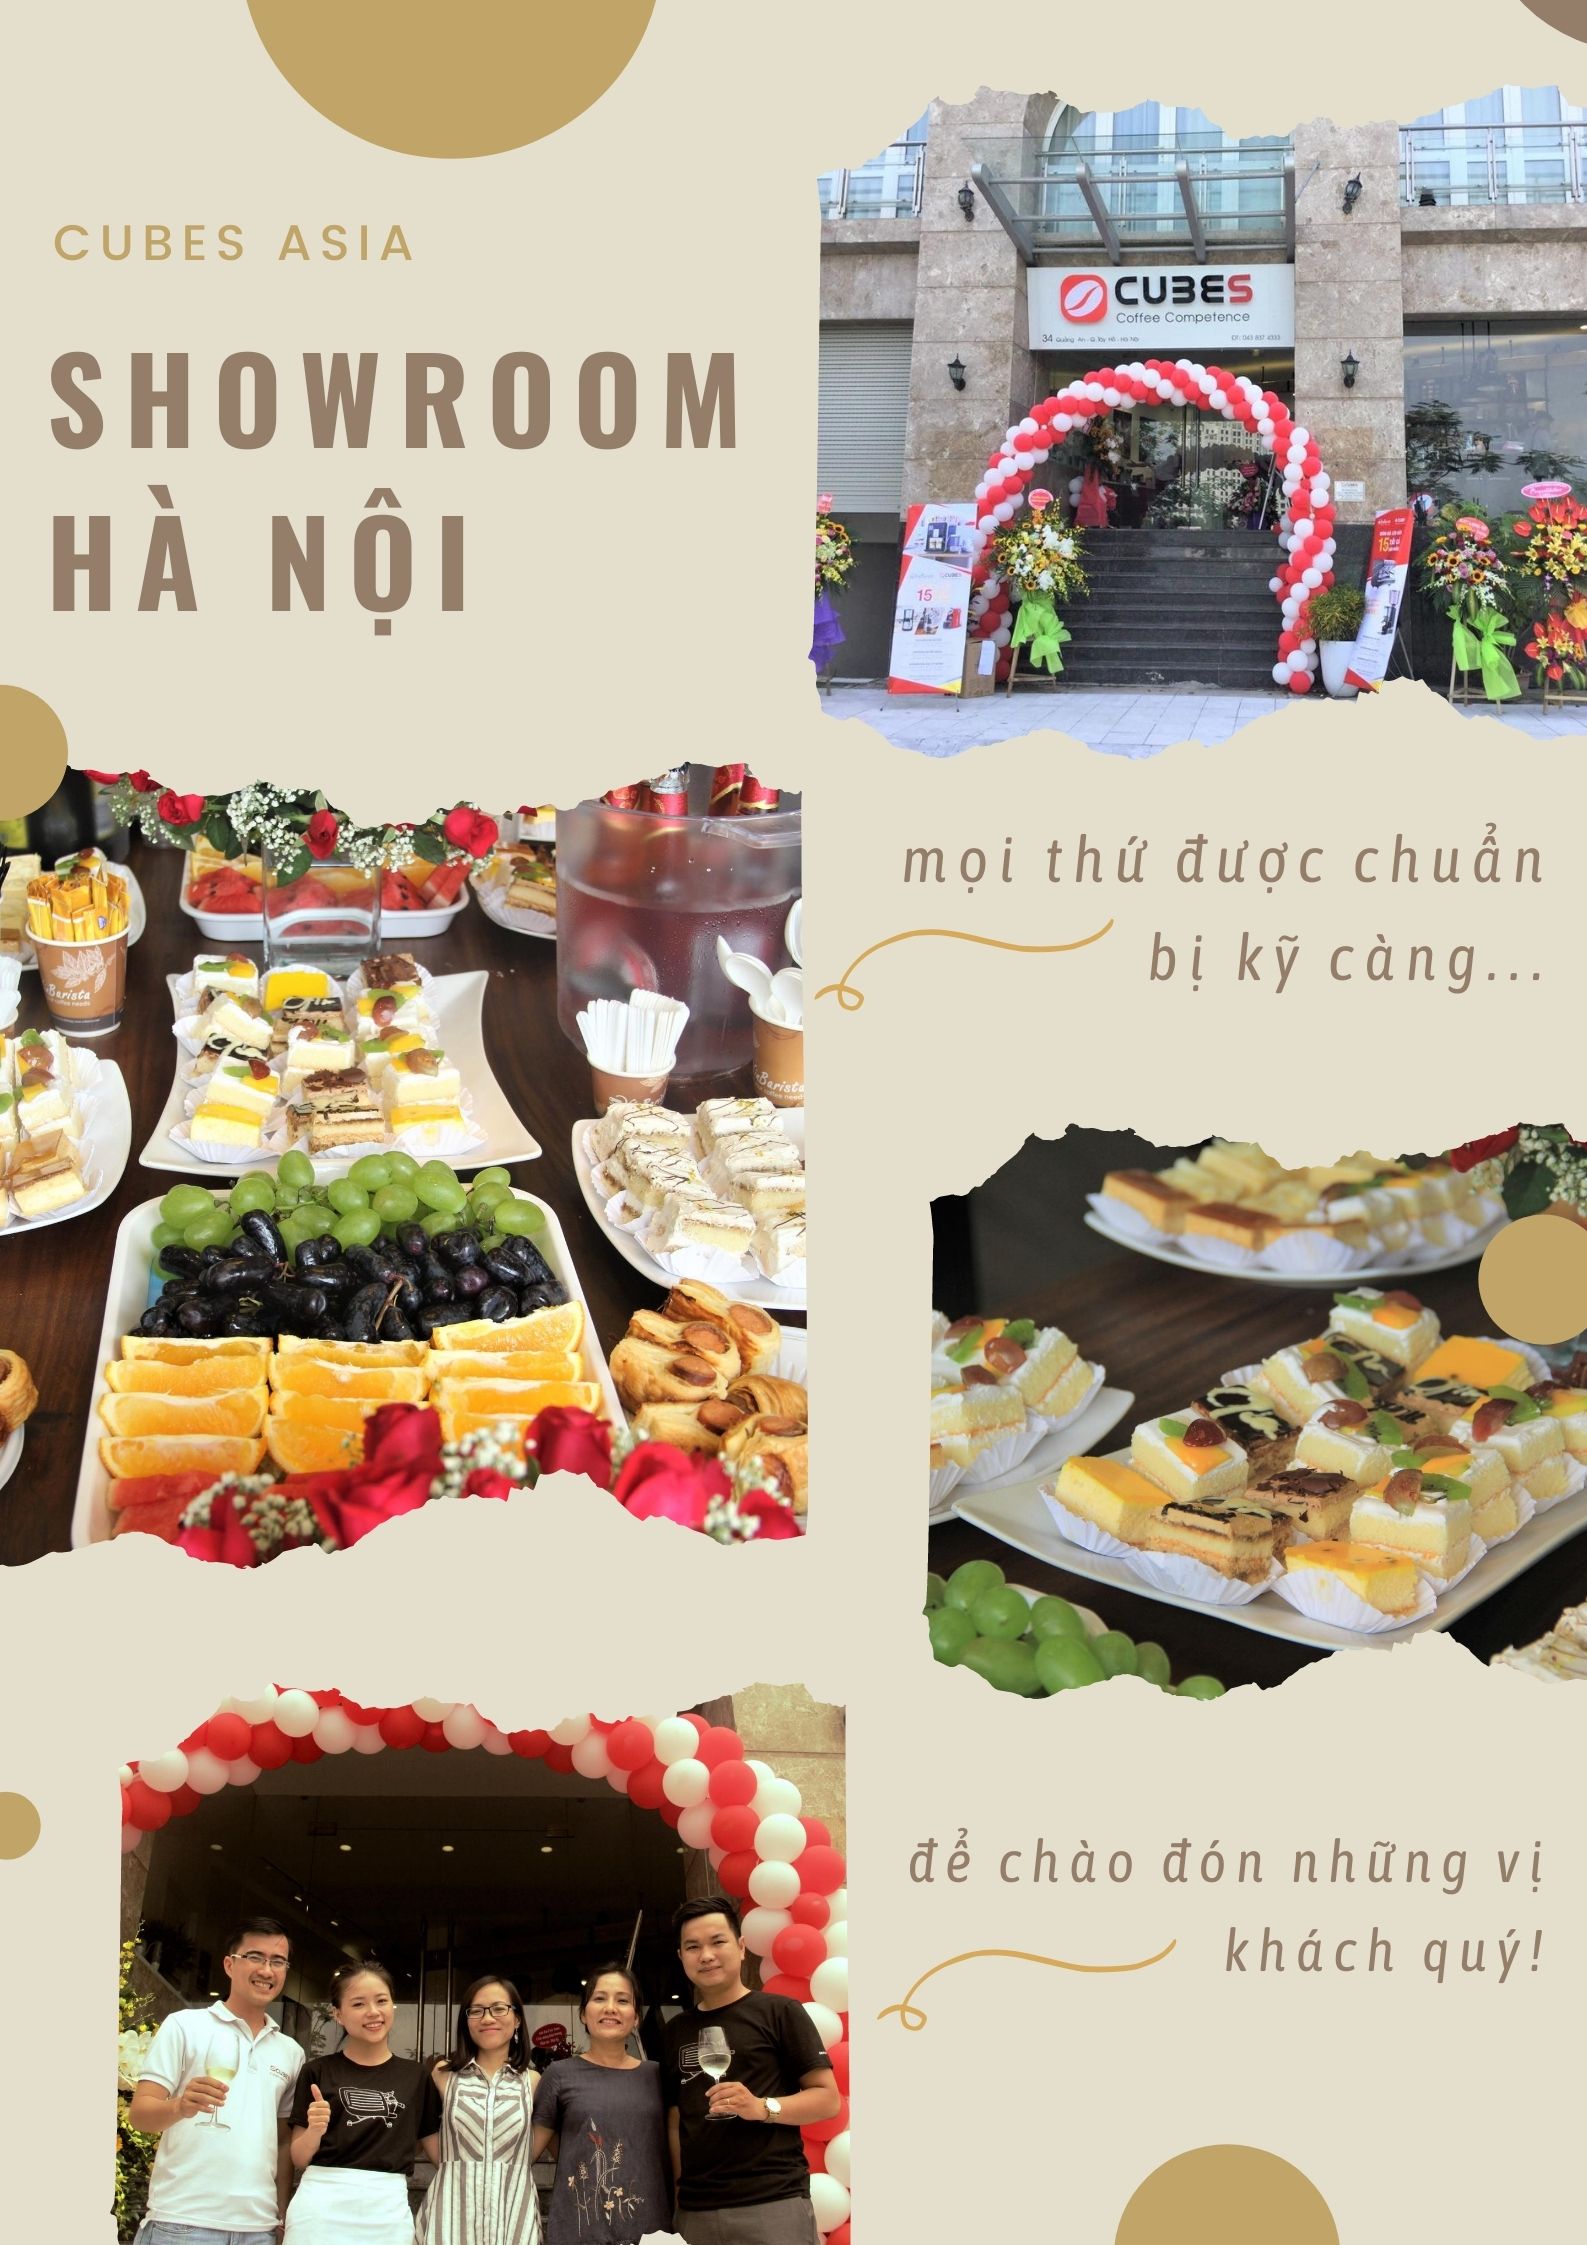 The ideal destination when buying a coffee machine in Hanoi - Cubes Asia showroom